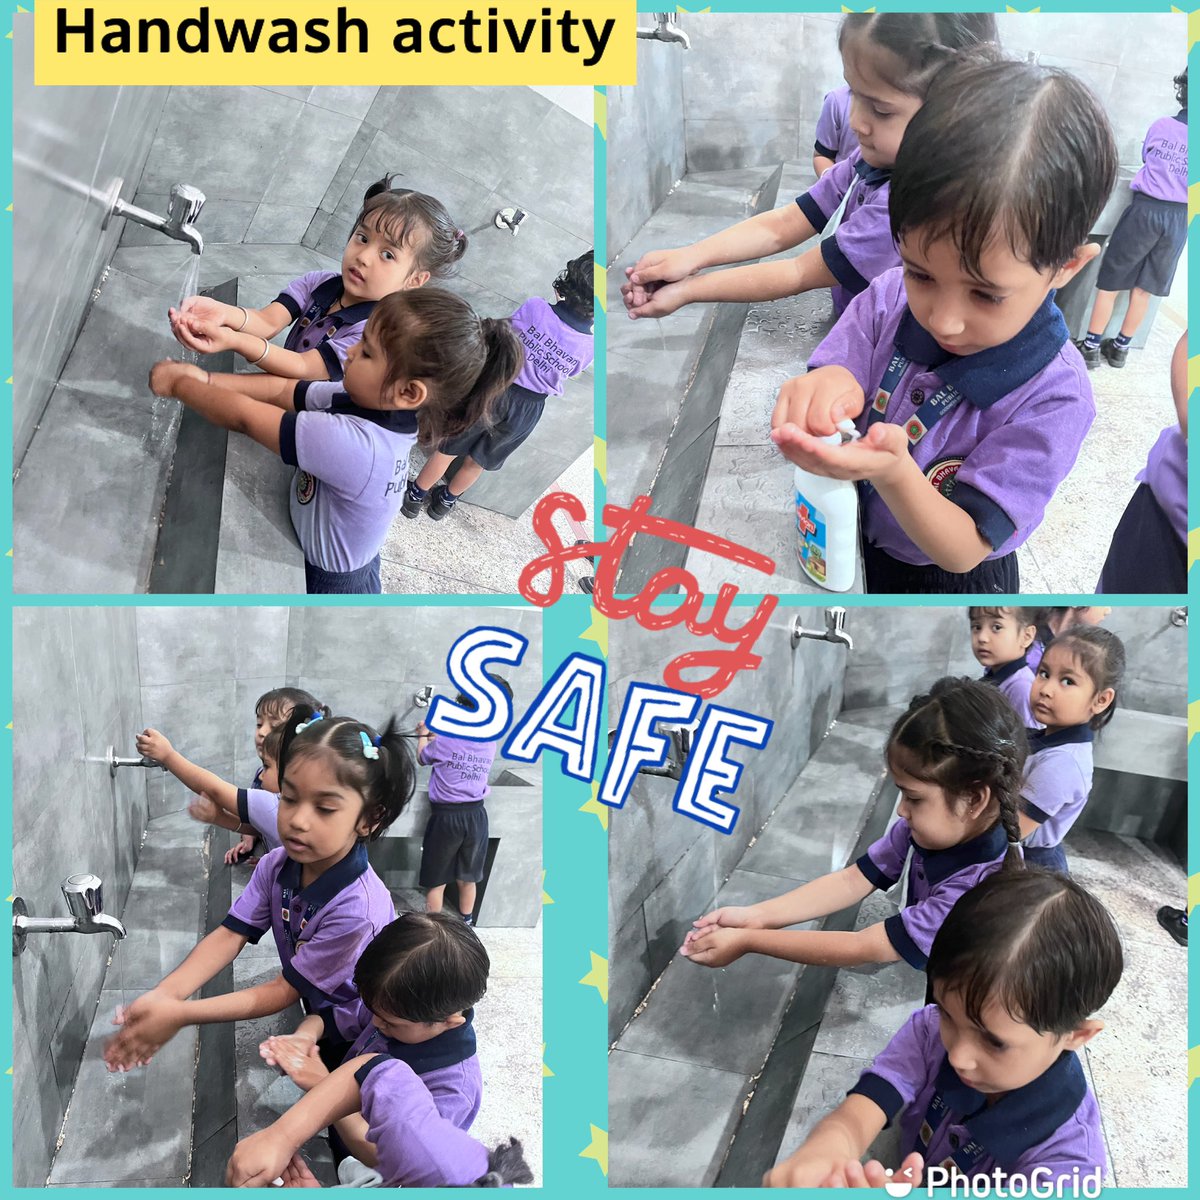 'Spread love, not germs'
Handwashing: A small act; big impact @vividh87 @BBPSMV @EduMinOfIndia 
#bbps #healthandhygiene